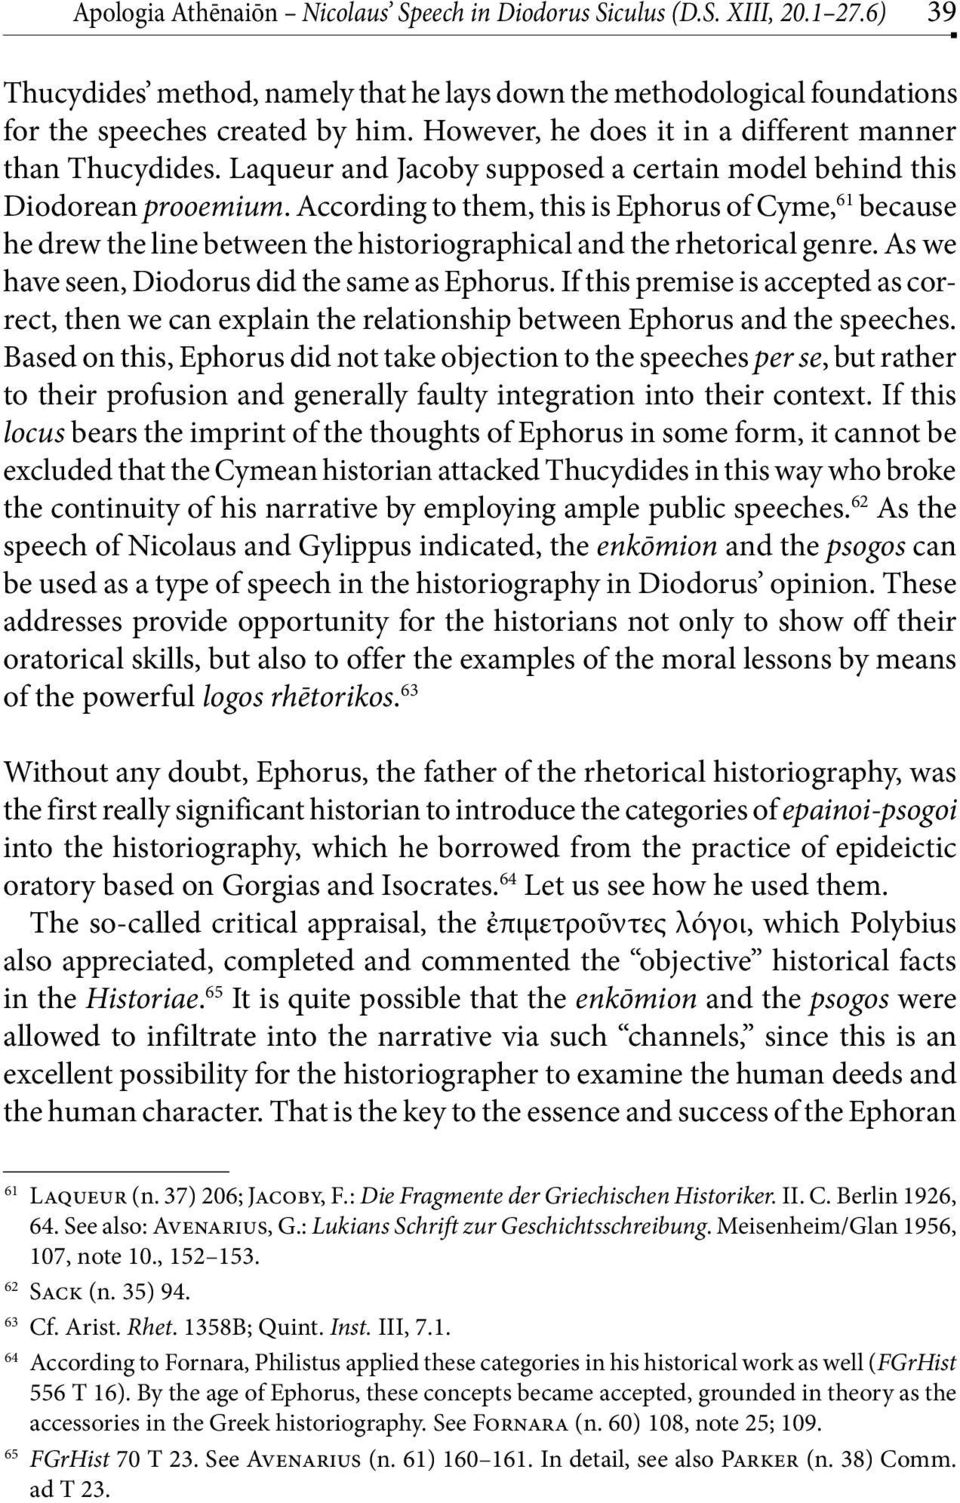 According to them, this is Ephorus of Cyme, 61 because he drew the line between the historiographical and the rhetorical genre. As we have seen, Diodorus did the same as Ephorus.